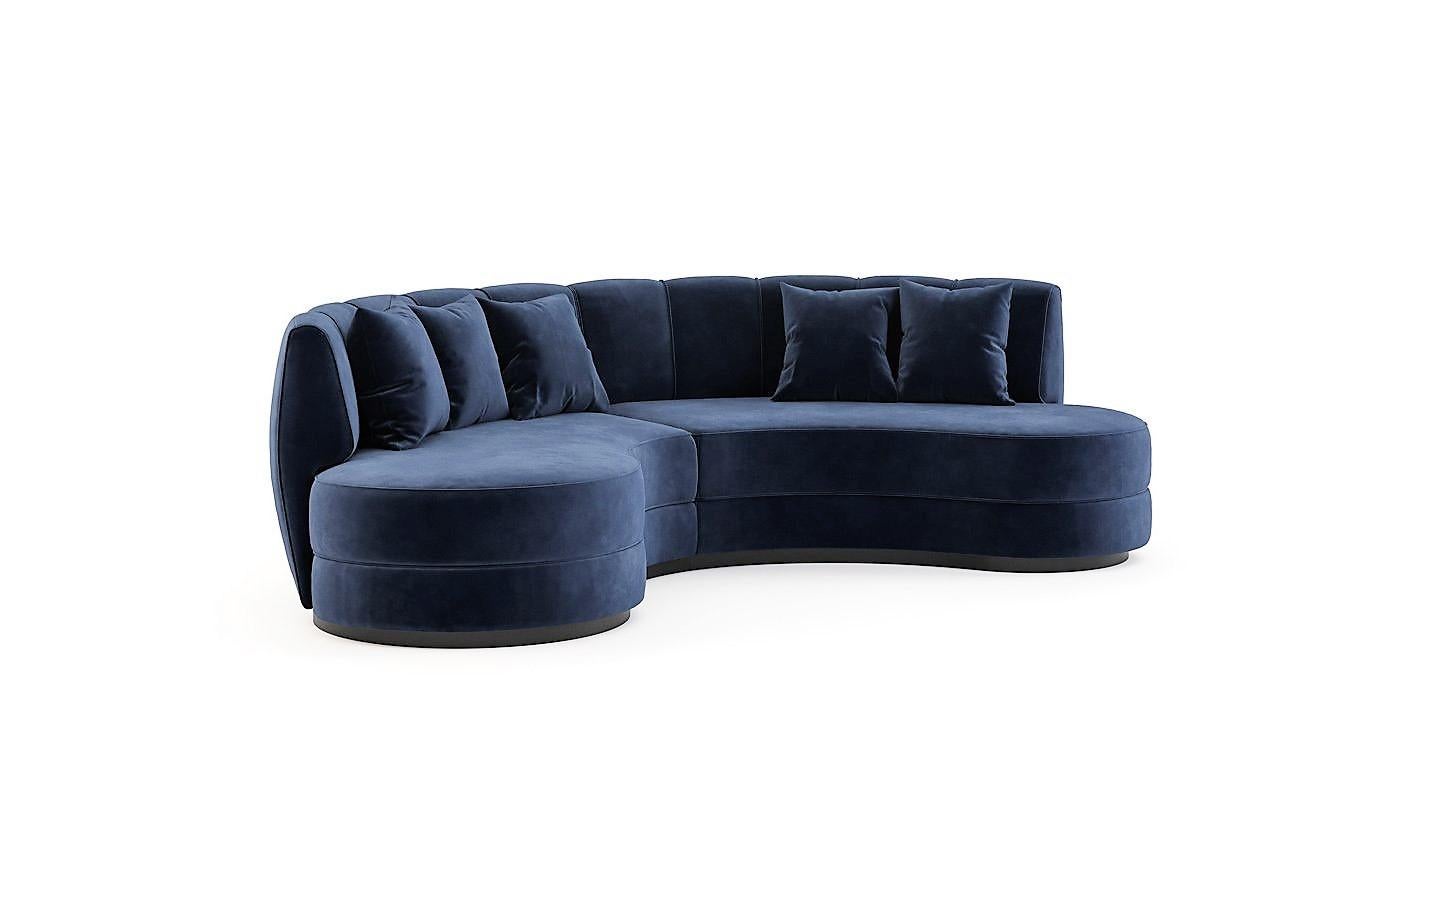 Mid-Century Modern inspired sectional sofa featuring curved design with luxurious blueberry blue cotton velvet fabric. Supported by smoked eucalyptus wood base.
Standard dimensions:
293 cm x 157 cm x 84 cm
Finishes:
Fabrics: Cotton Velvet Ref: Deep